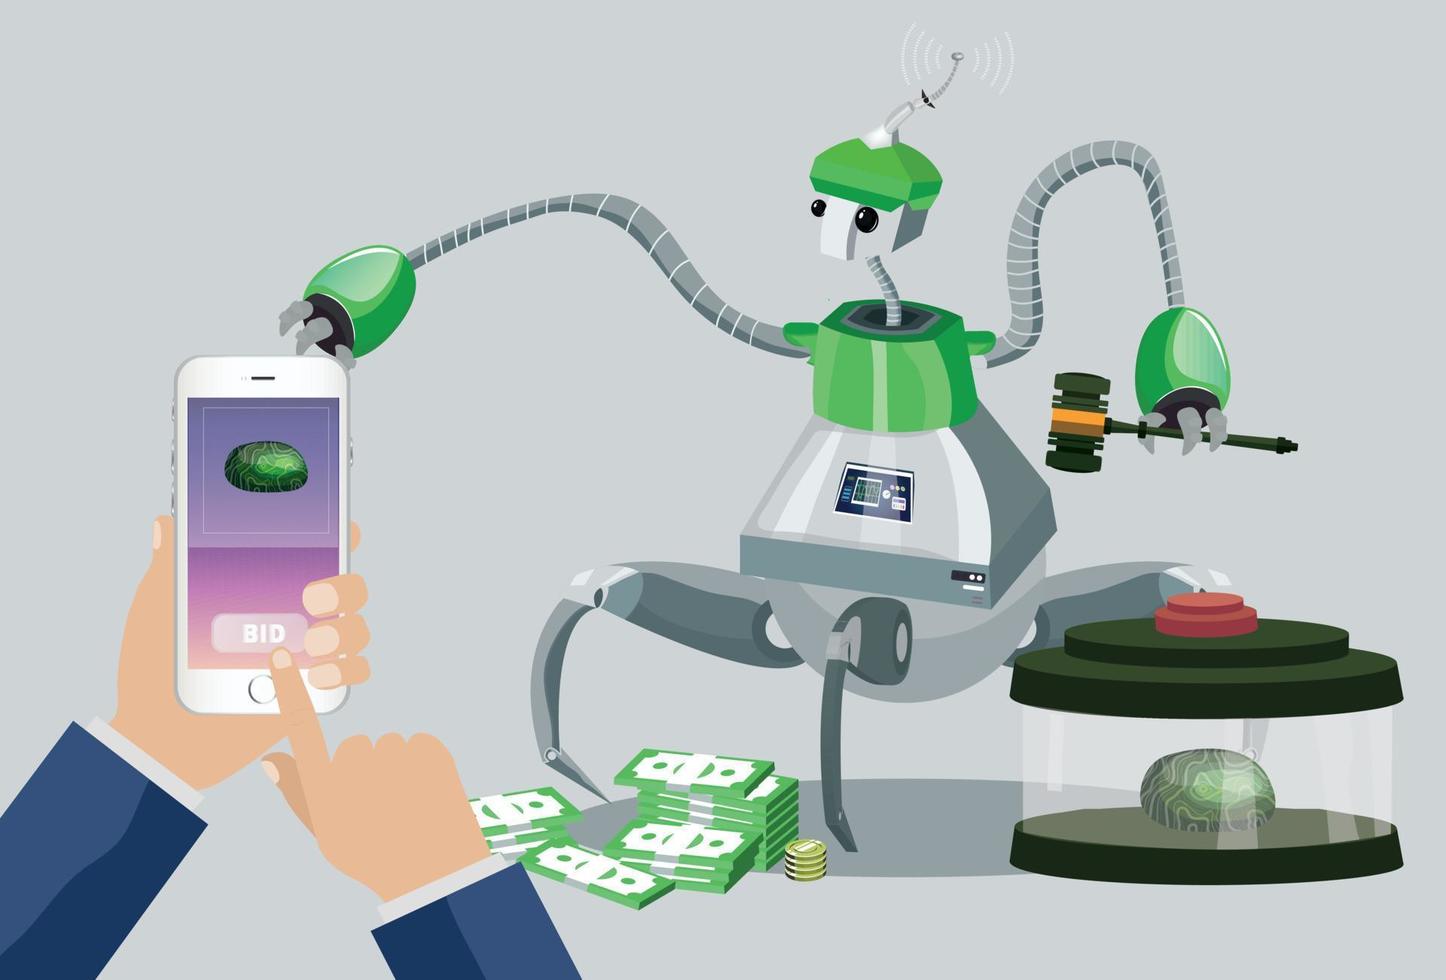 Robot selling in an online action a valuable item-sureal illustration vector